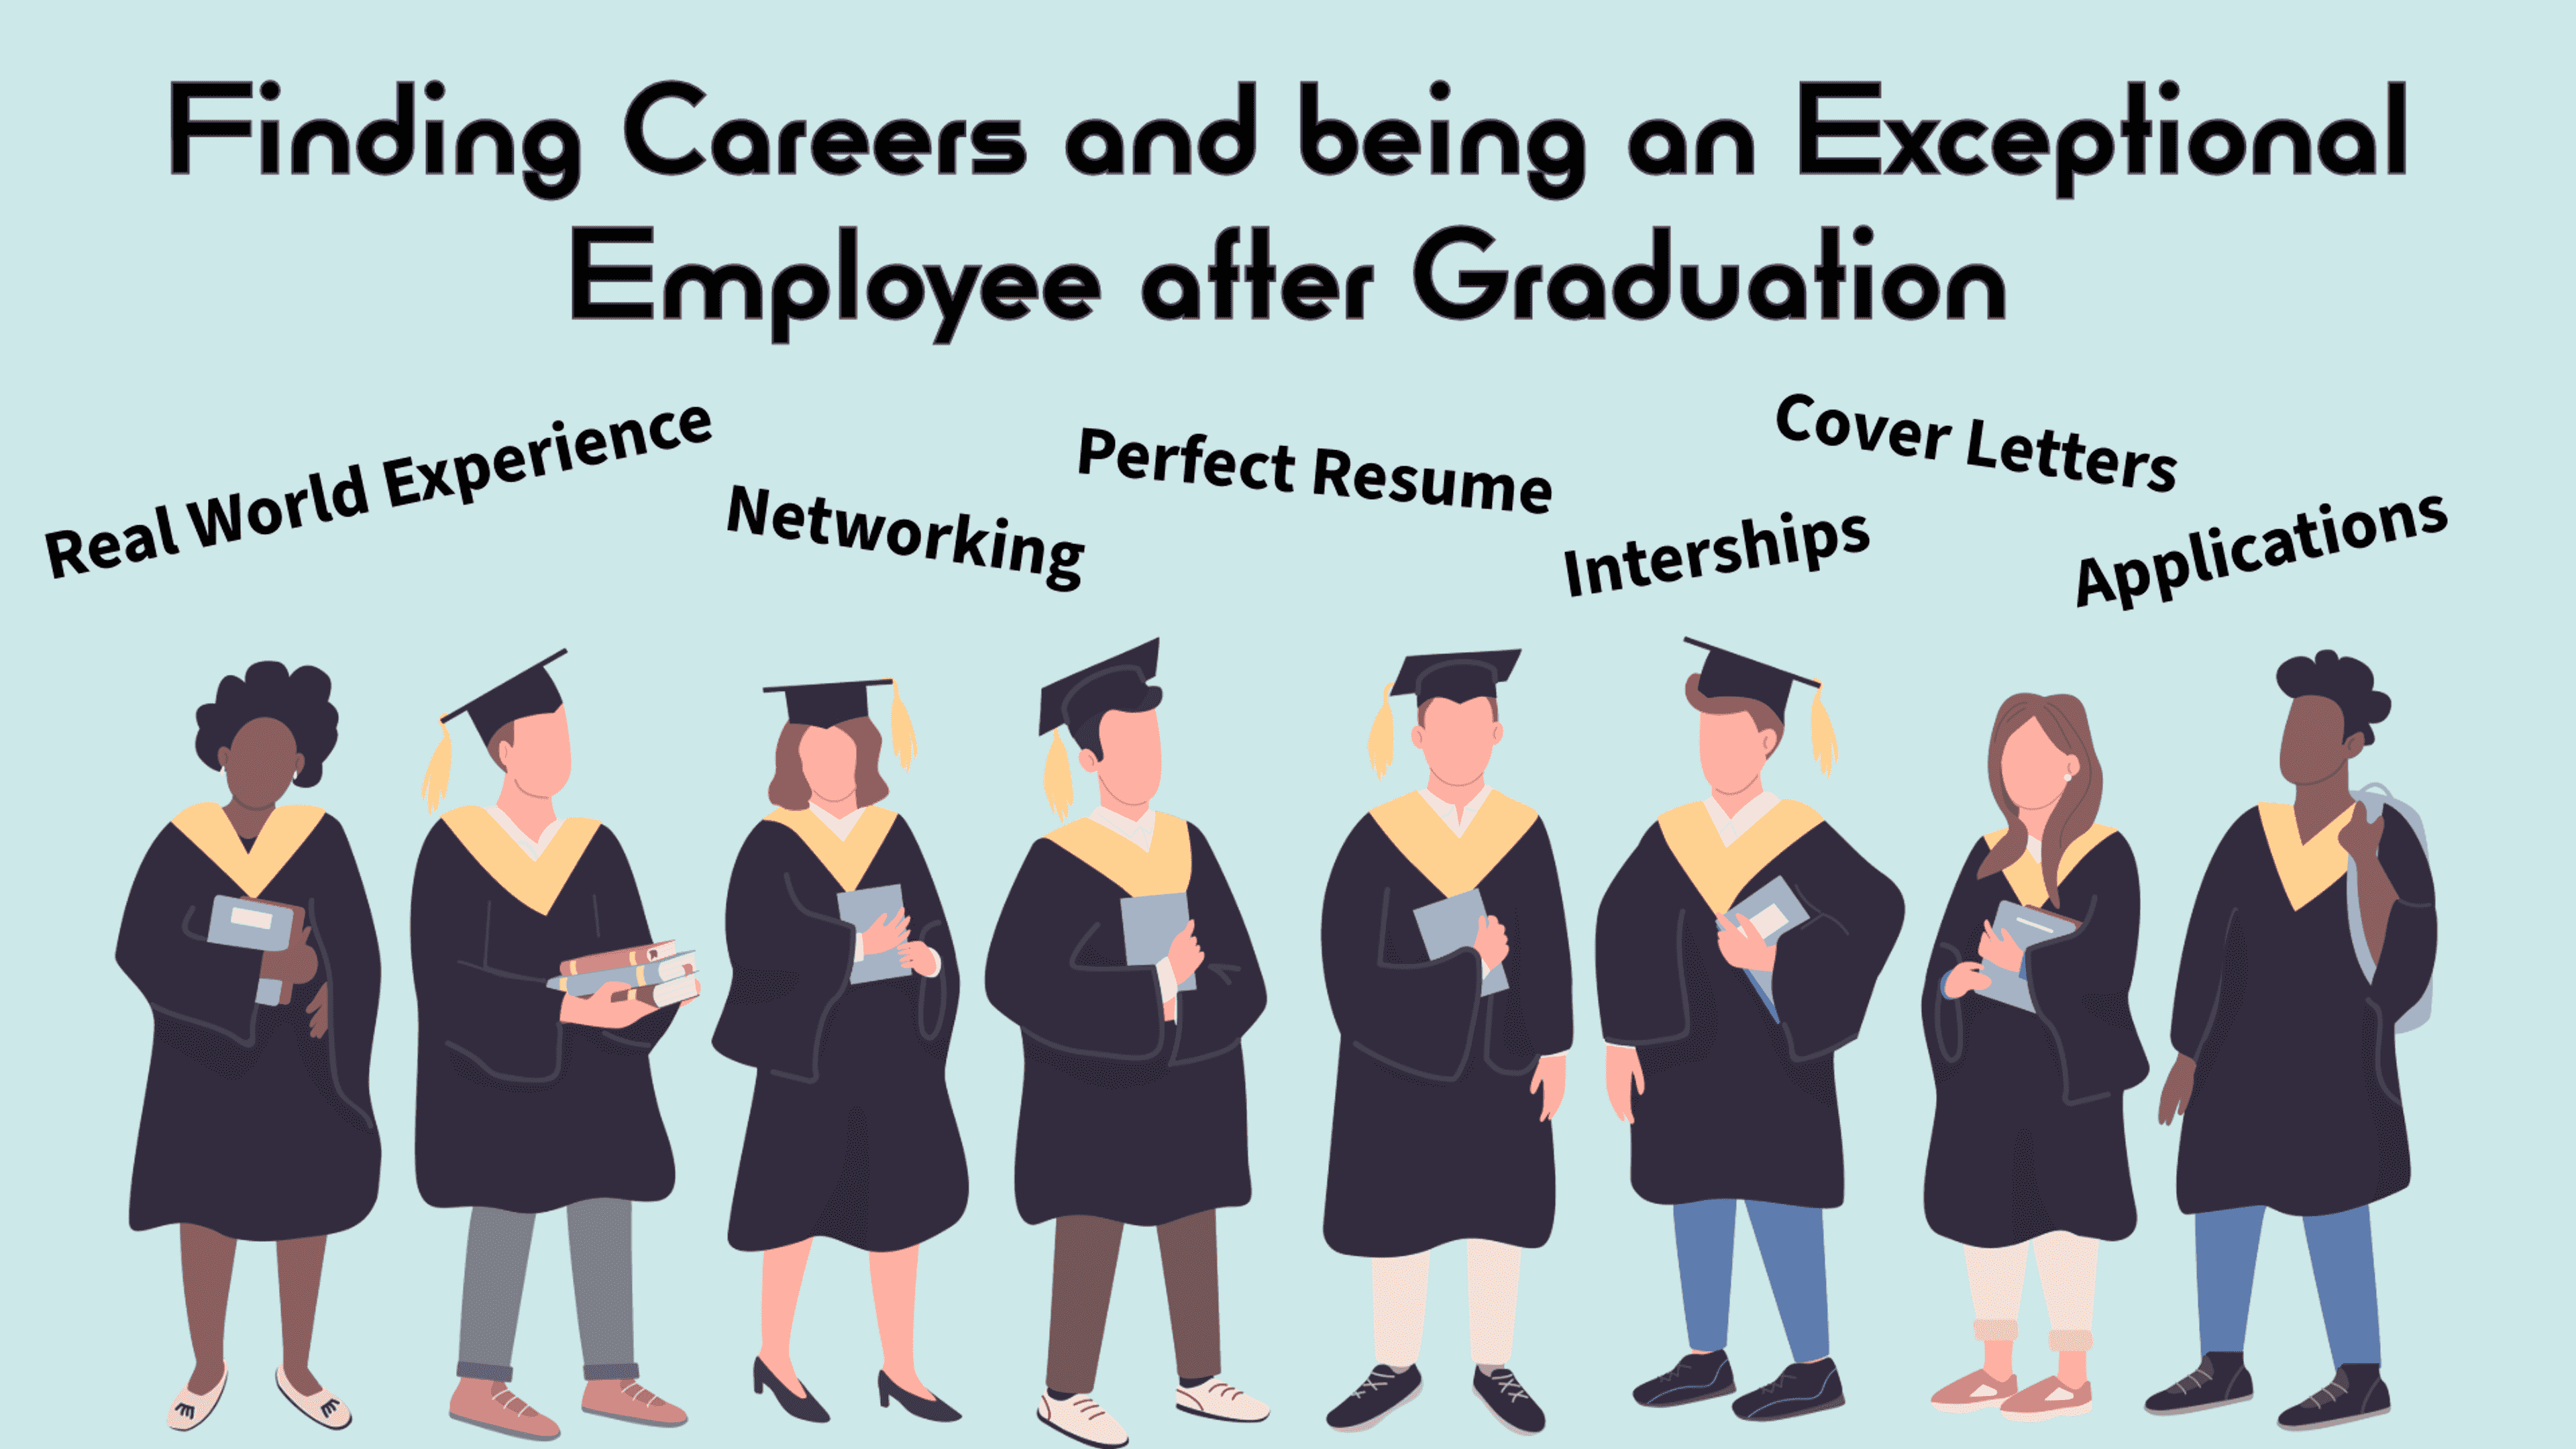 Finding careers and being an exceptional employee after gradation